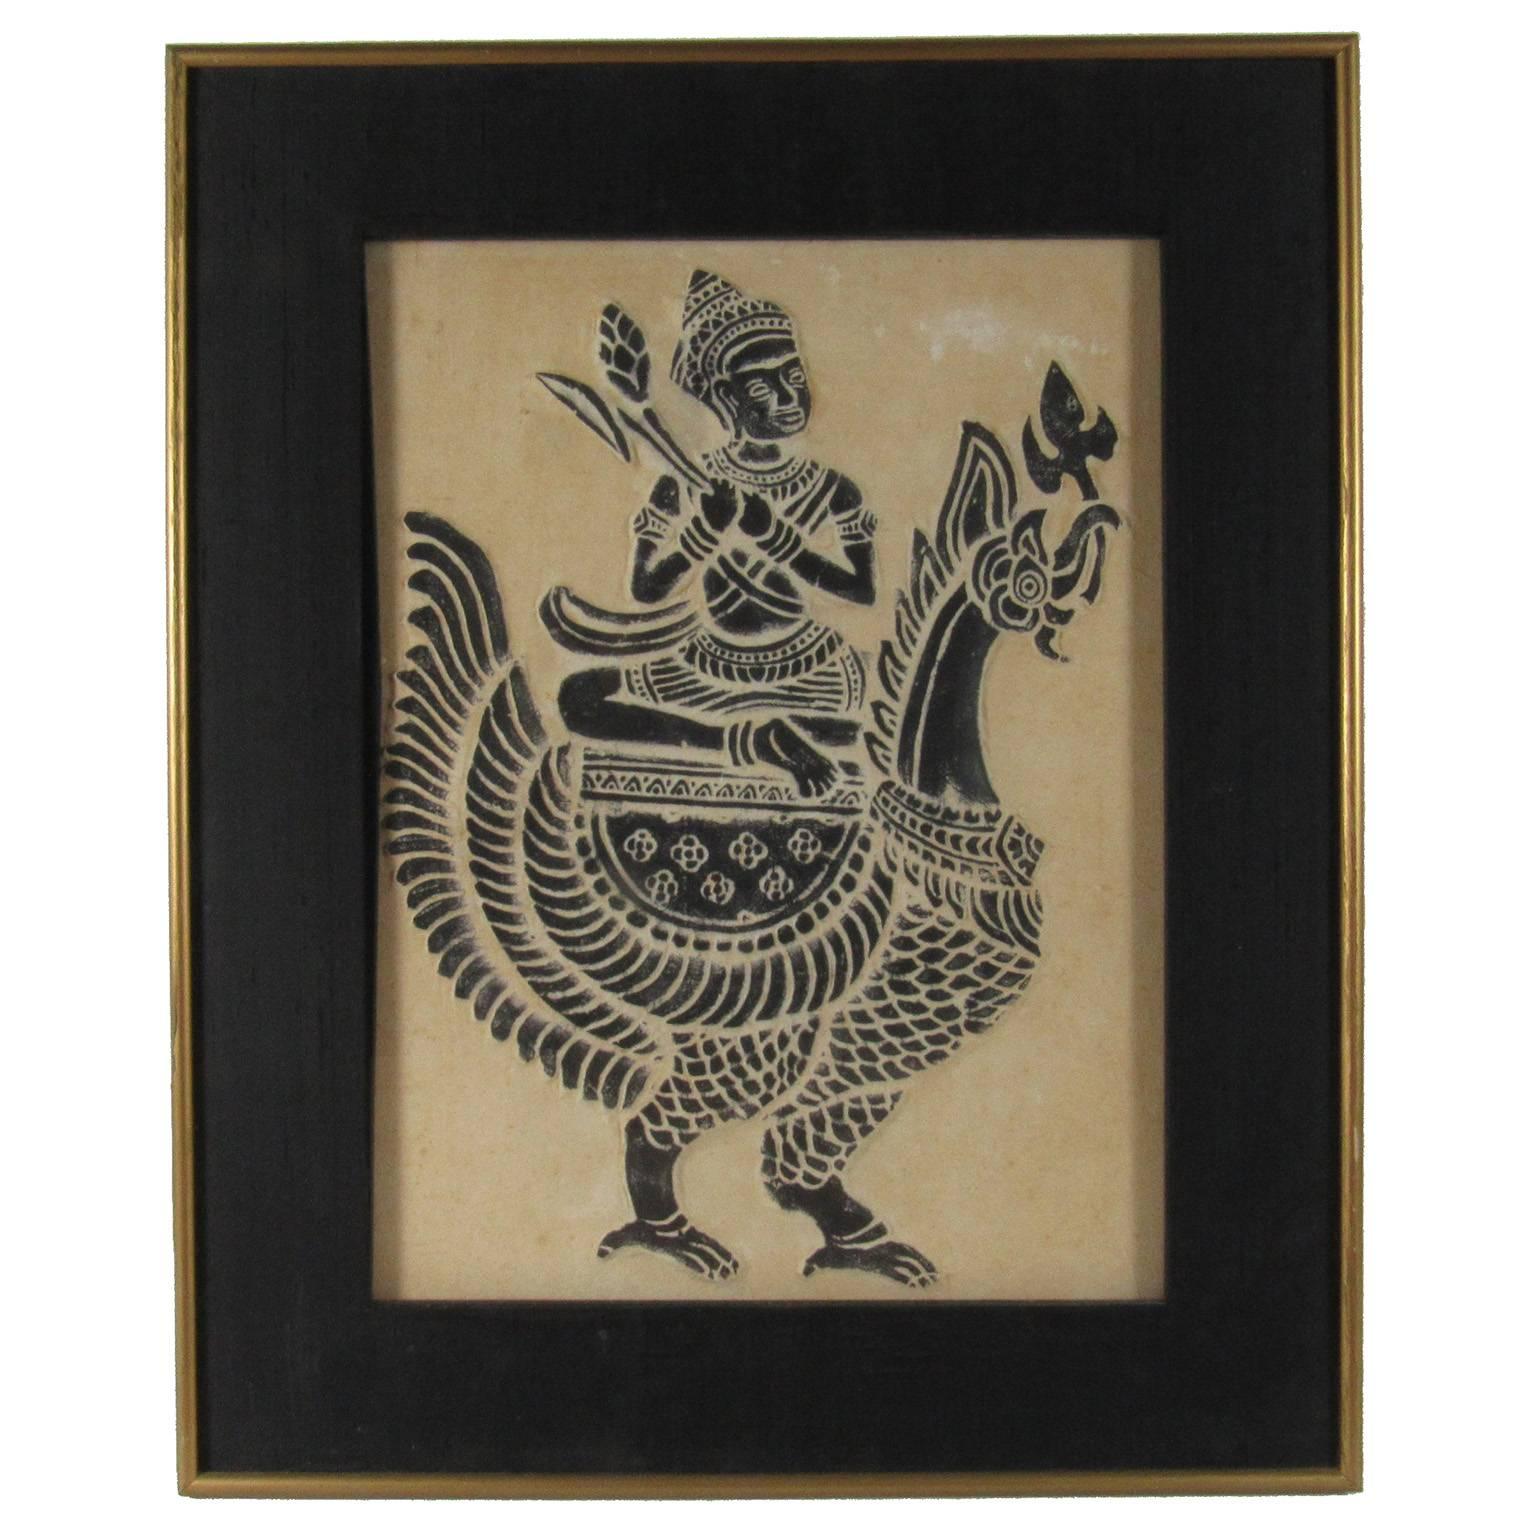 Thai Grave Rubbing on Handmade Paper with Diety Riding a Rooster